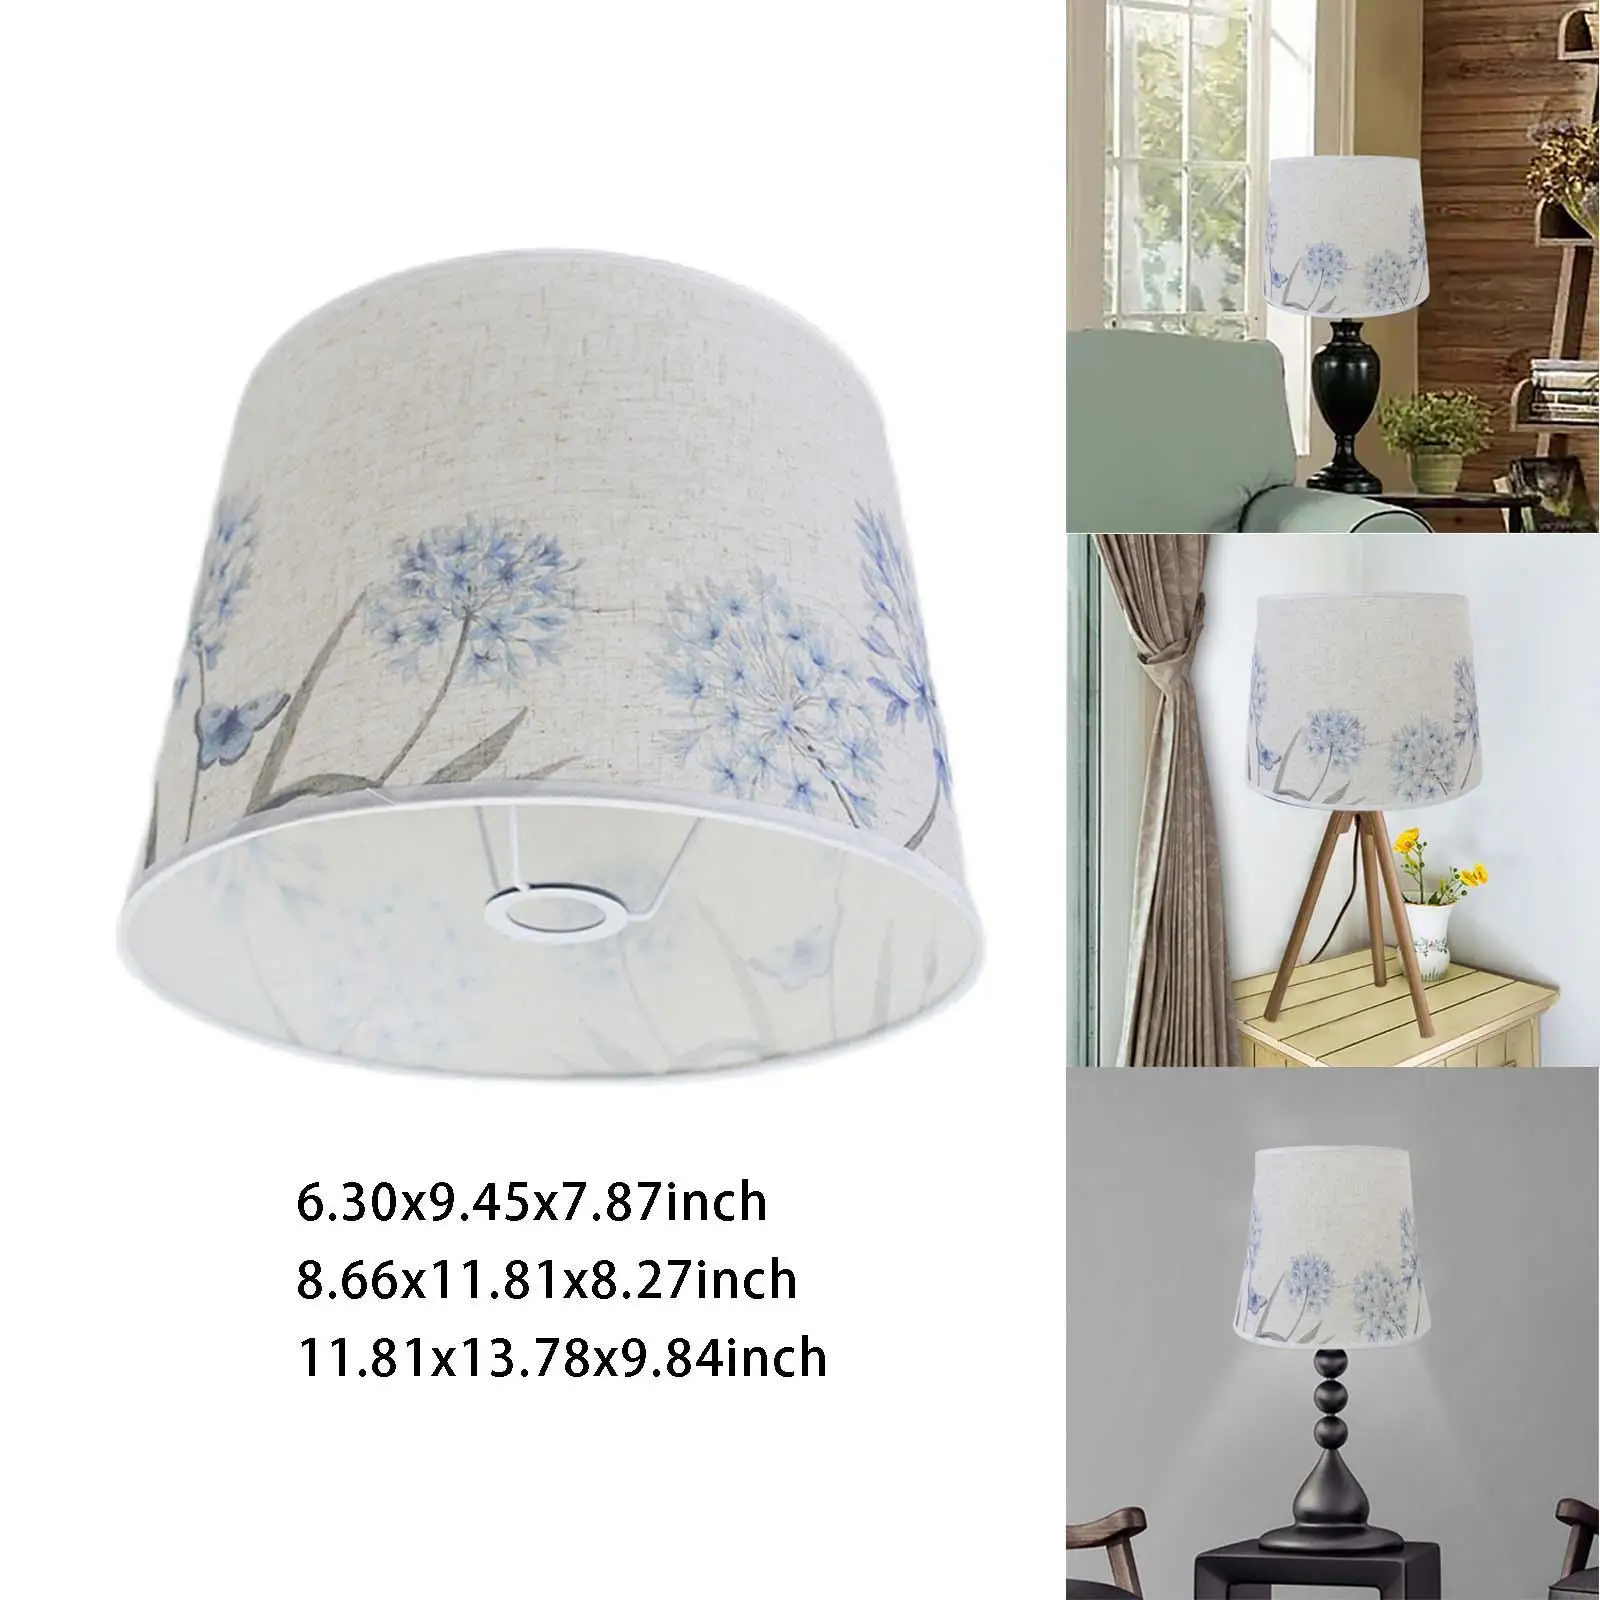 Rustic Style Simple Table Lamp Shade  Bouffant Lampshade  Fixtures Cover Removable Dustproof for Bedroom Office